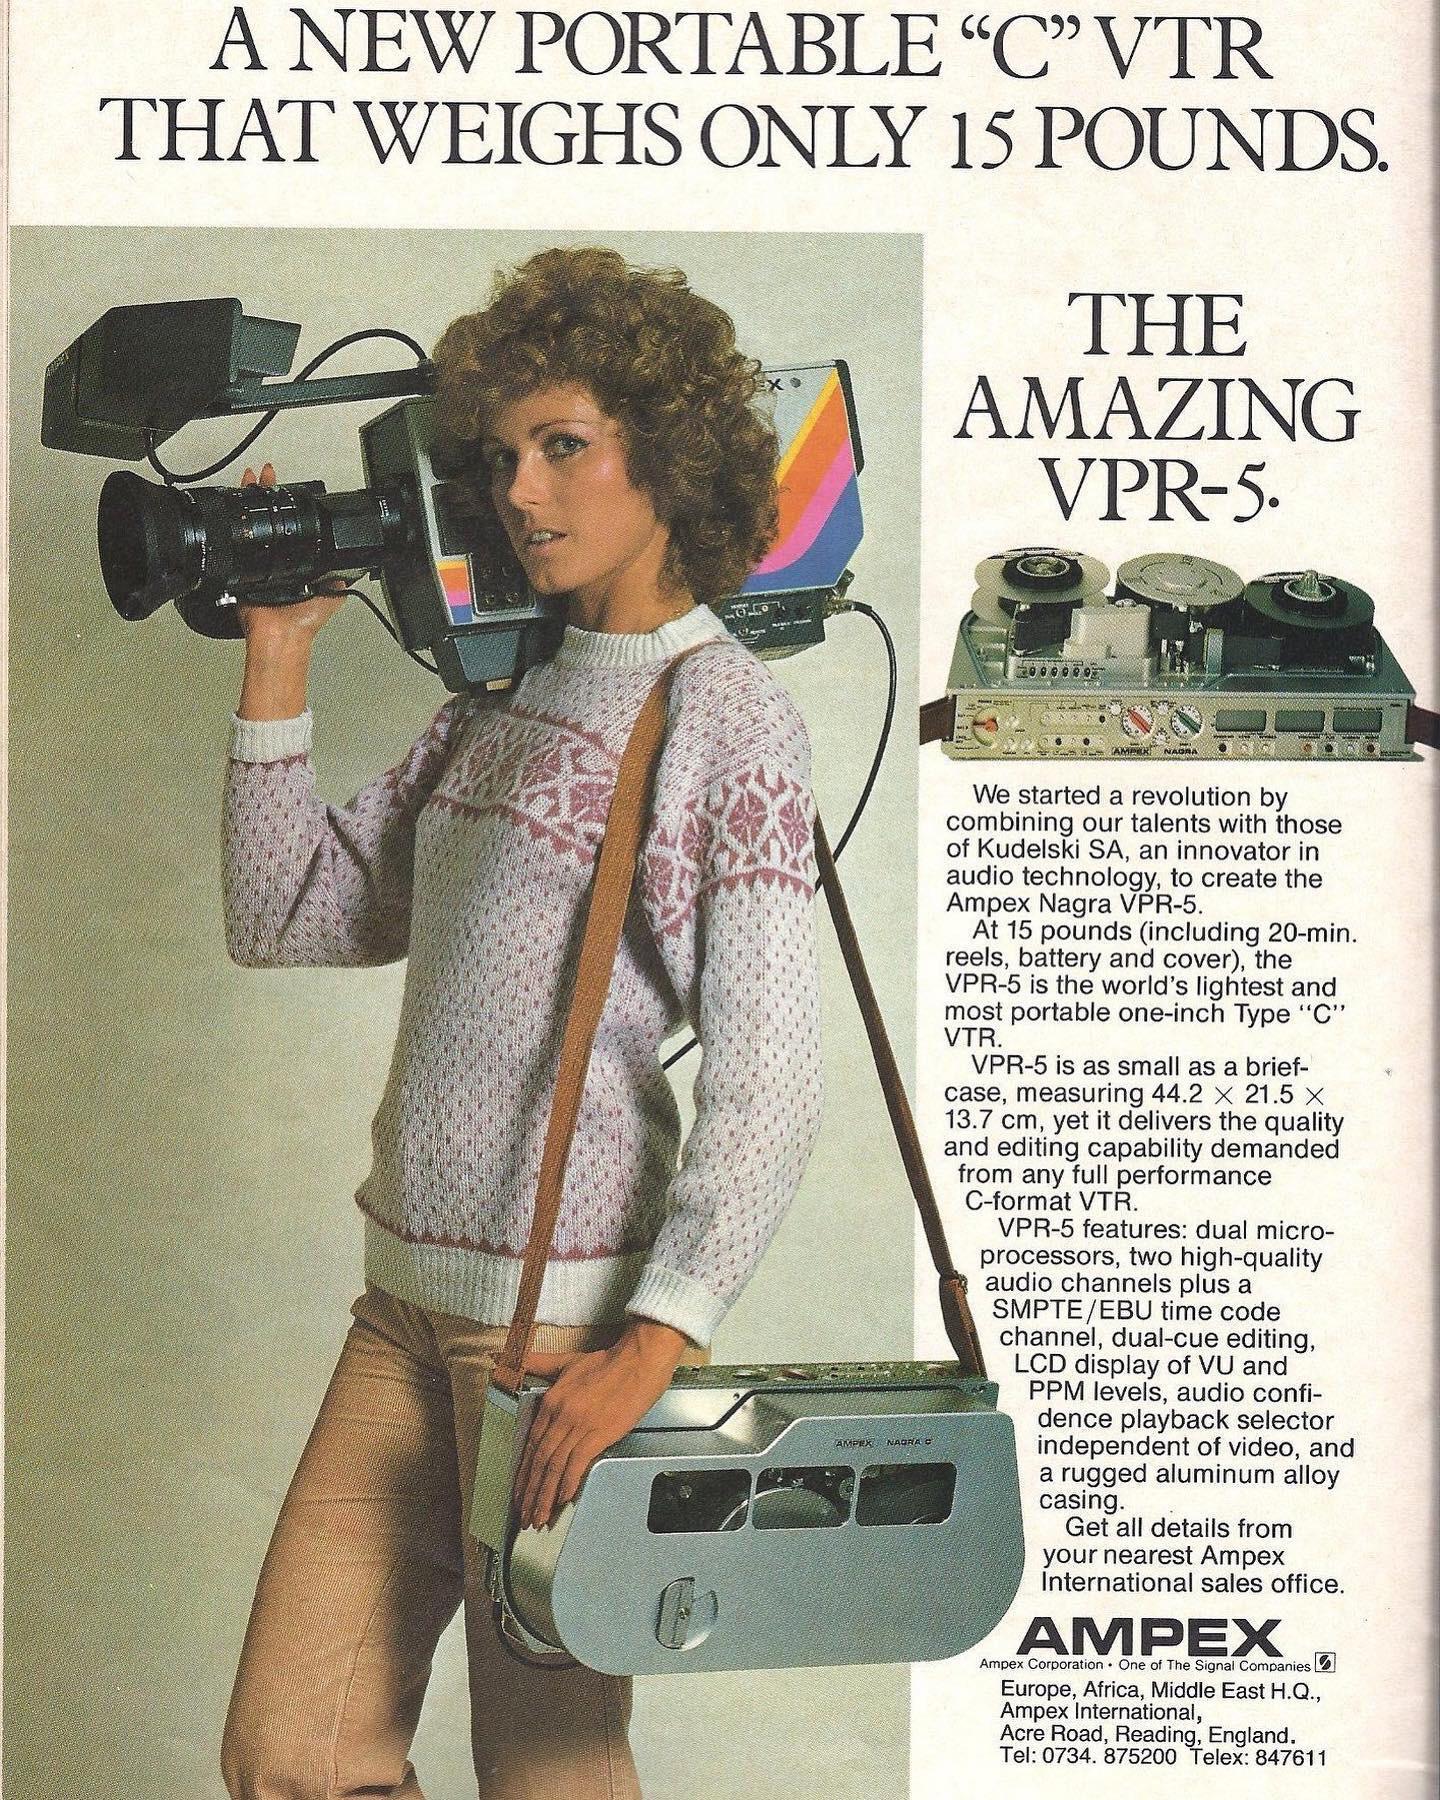 Camcorder+technology+from+roughly+1984